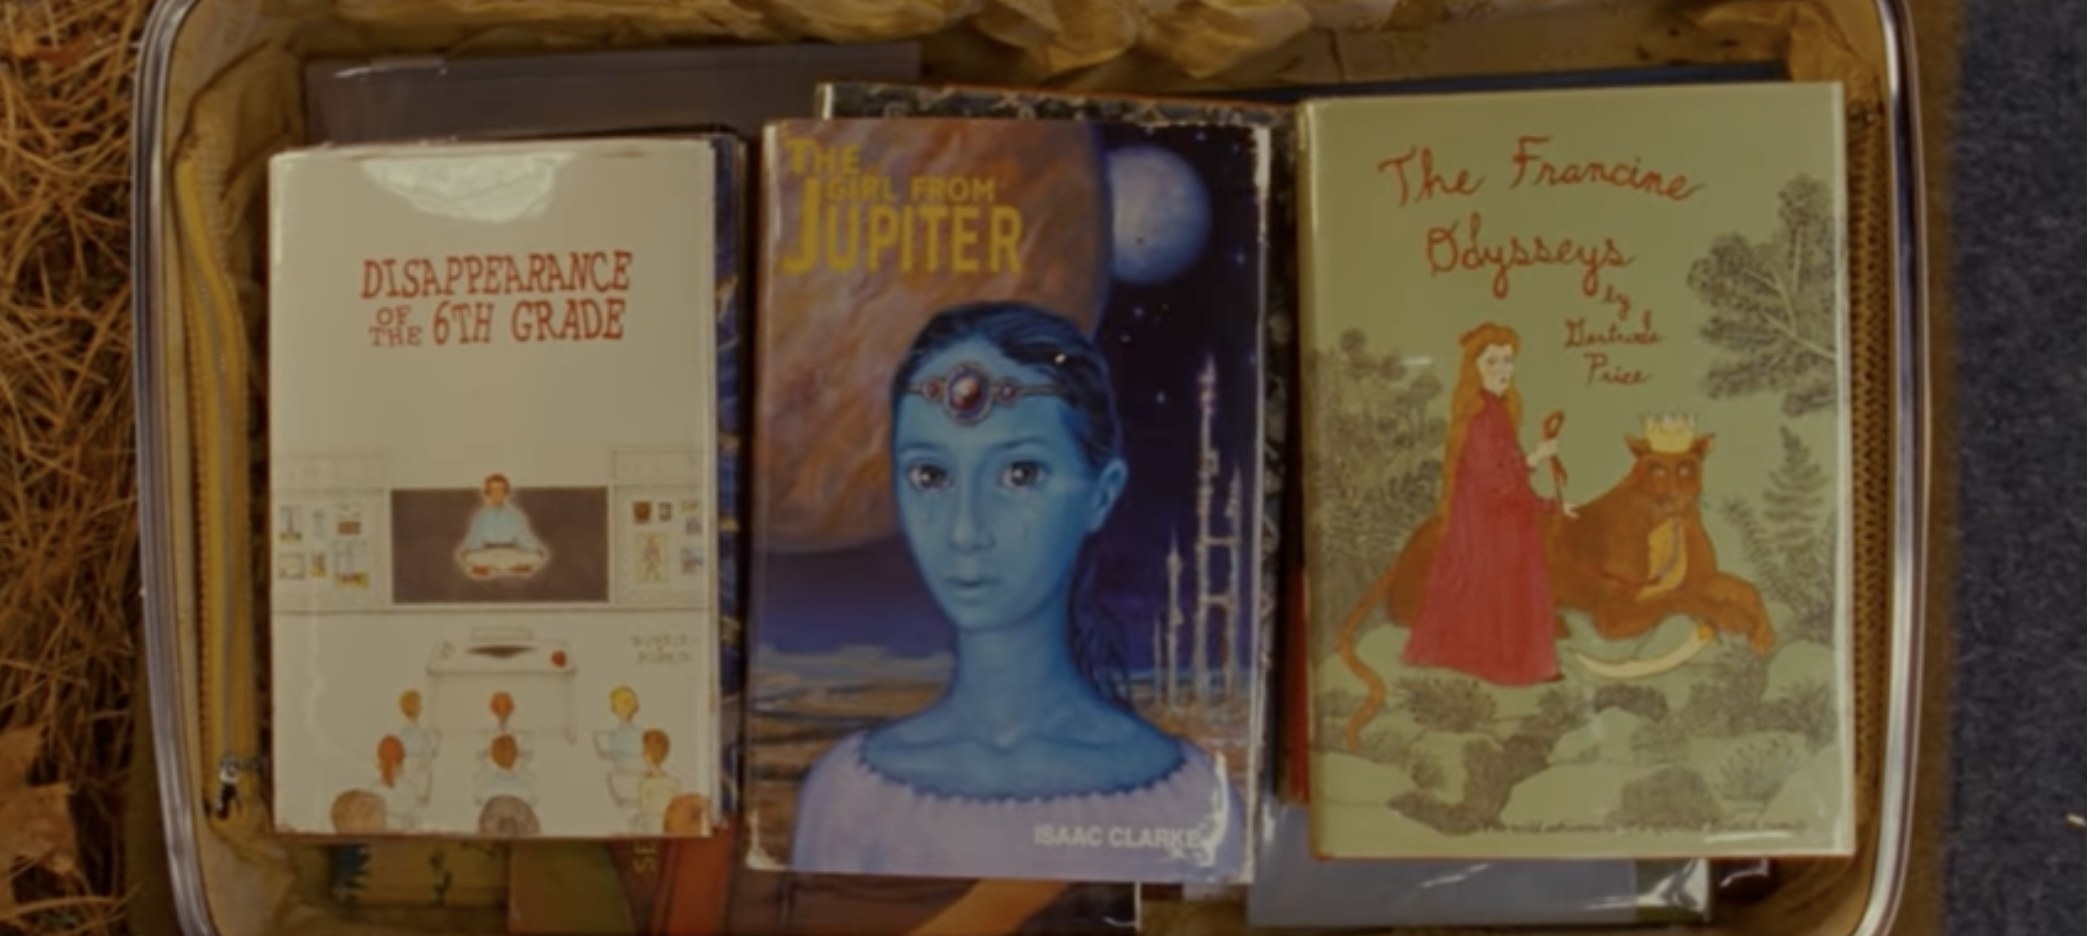 Book covers for &quot;Disappearance of the 6th Grade,&quot; &quot;The Girl from Jupiter,&quot; and &quot;The Francine Odysseys&quot;